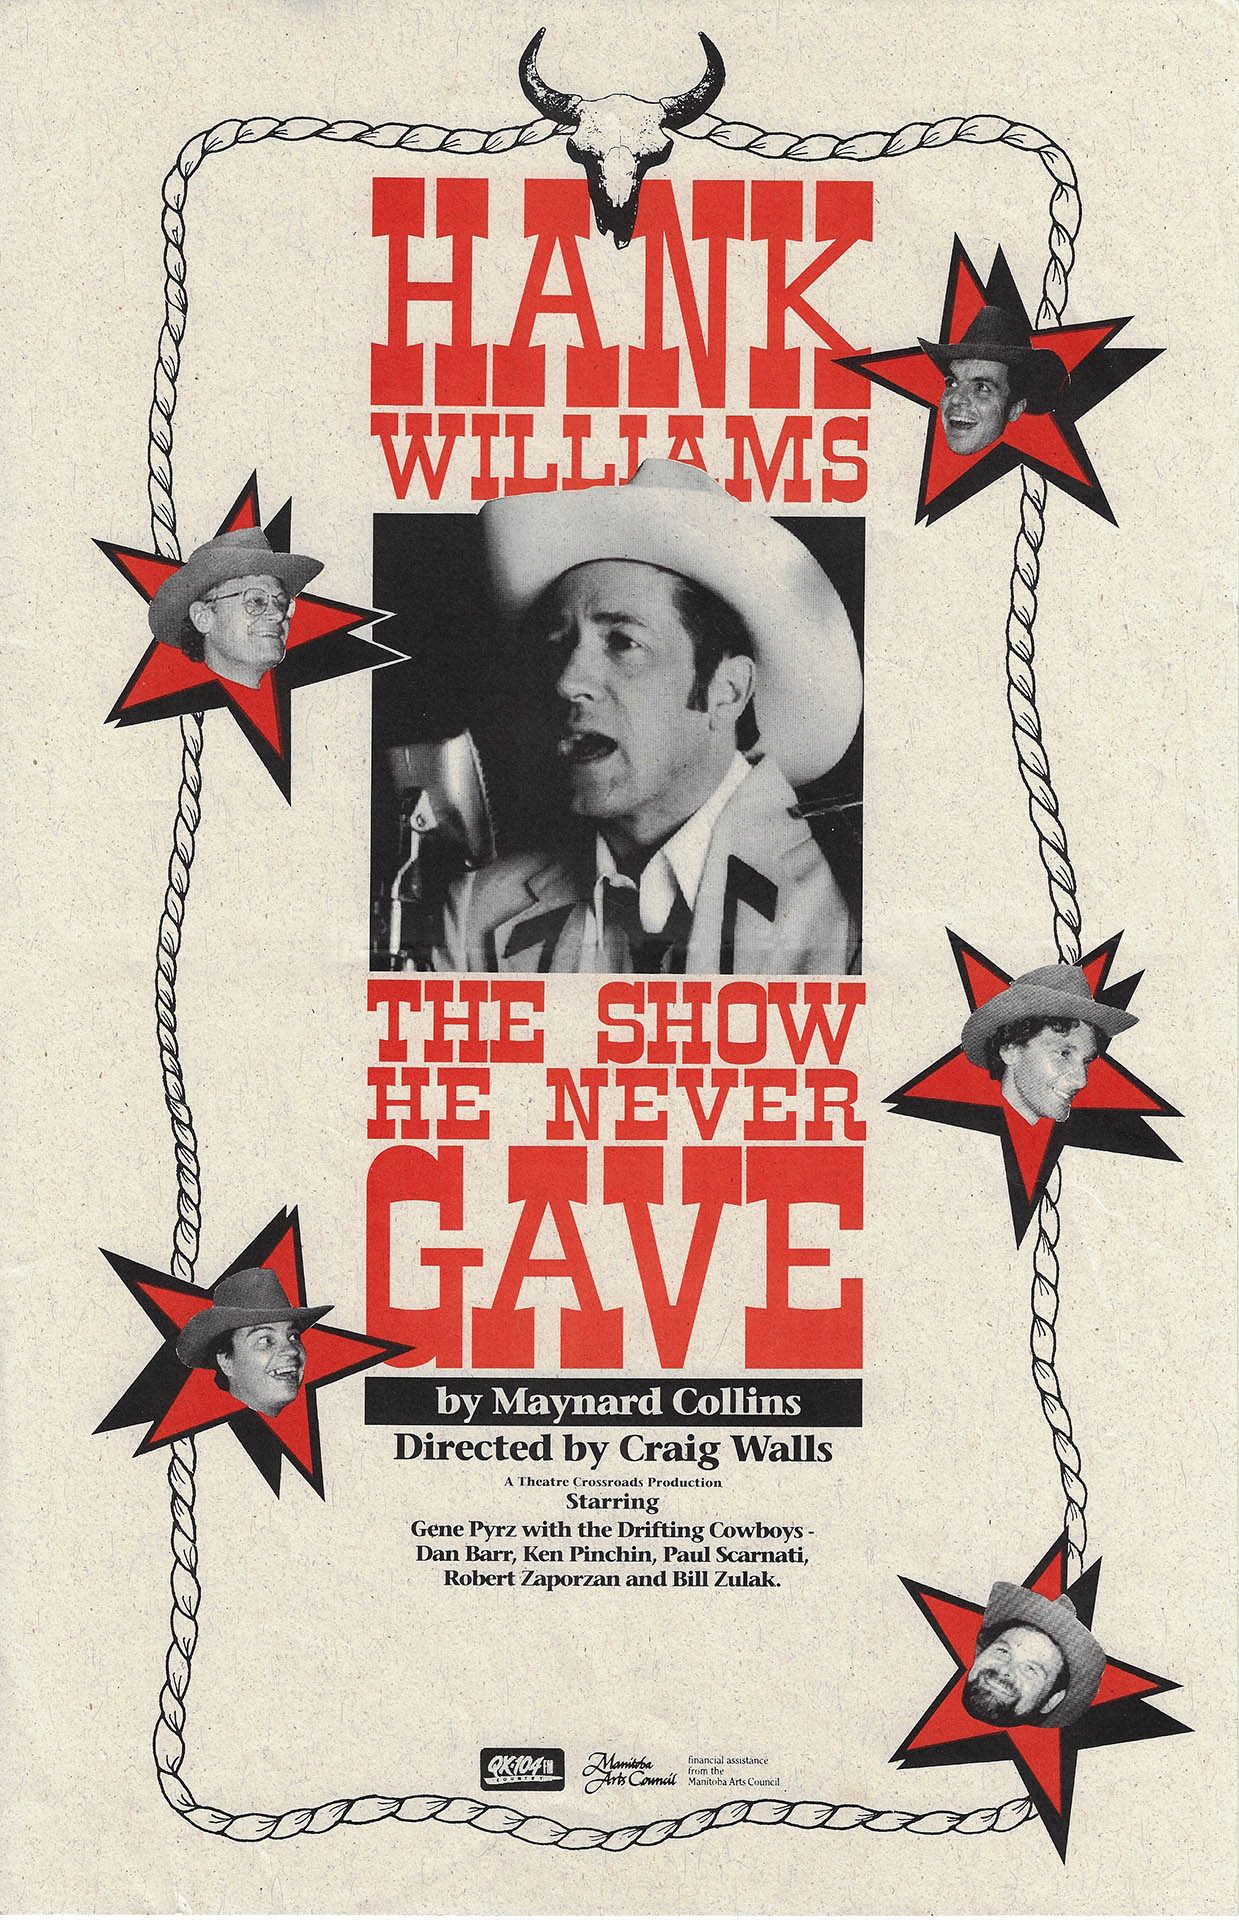 HANK WILLIAMS: THE SHOW HE NEVER GAVE – 1992